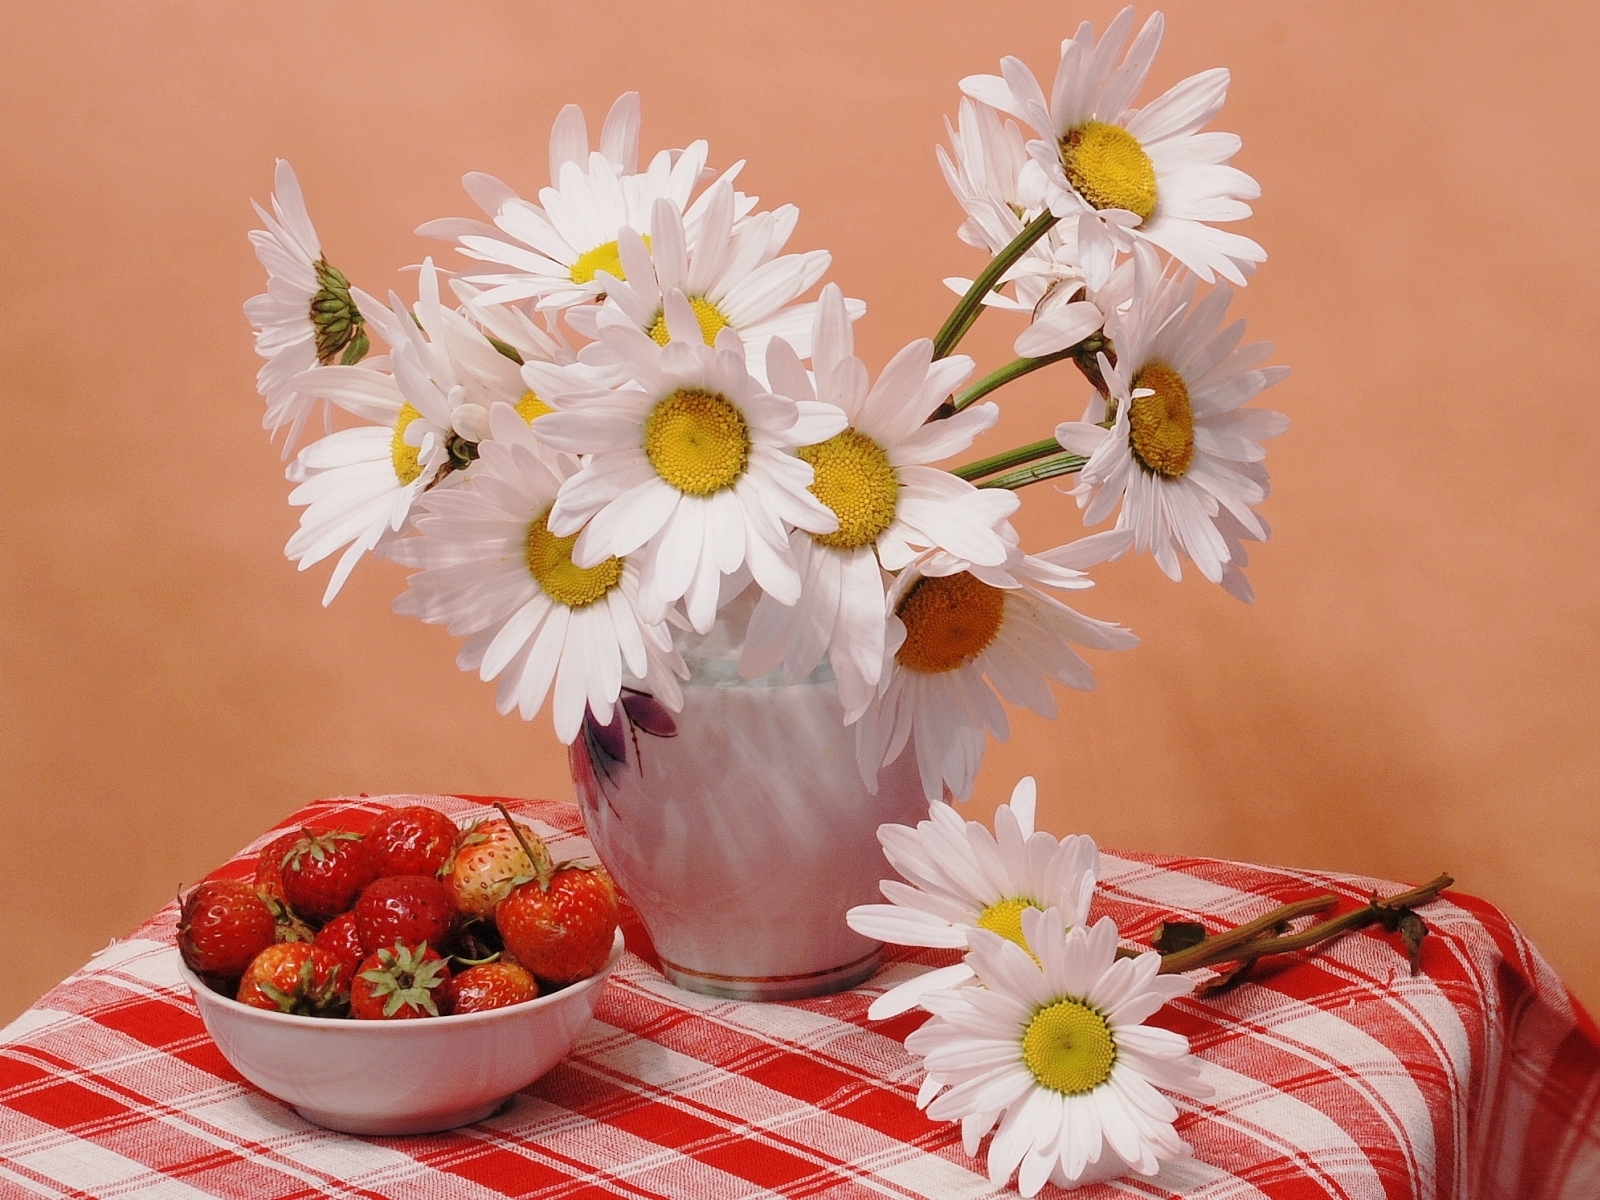 plants, flowers, food, strawberry, camomile, red